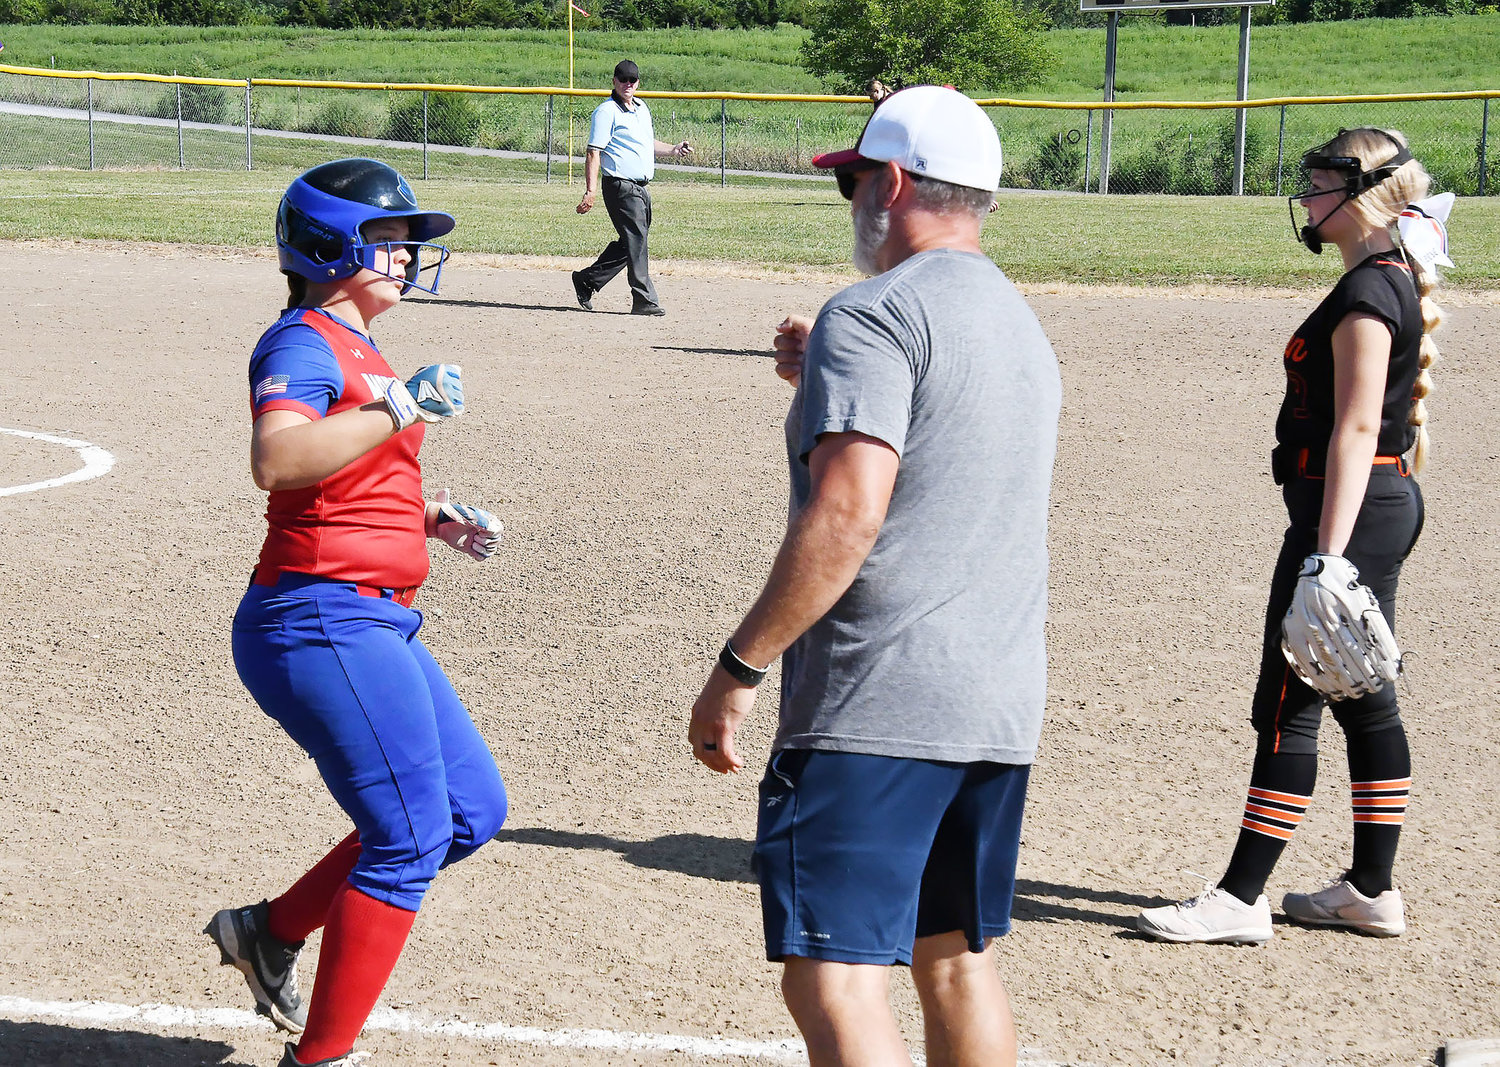 Moberly's Jordan Pasbrig is congratulated by Spartan assistant coach Dale Heimann at first base. Macon's Reece Adair and umpire Bob Roberts also are photographed.